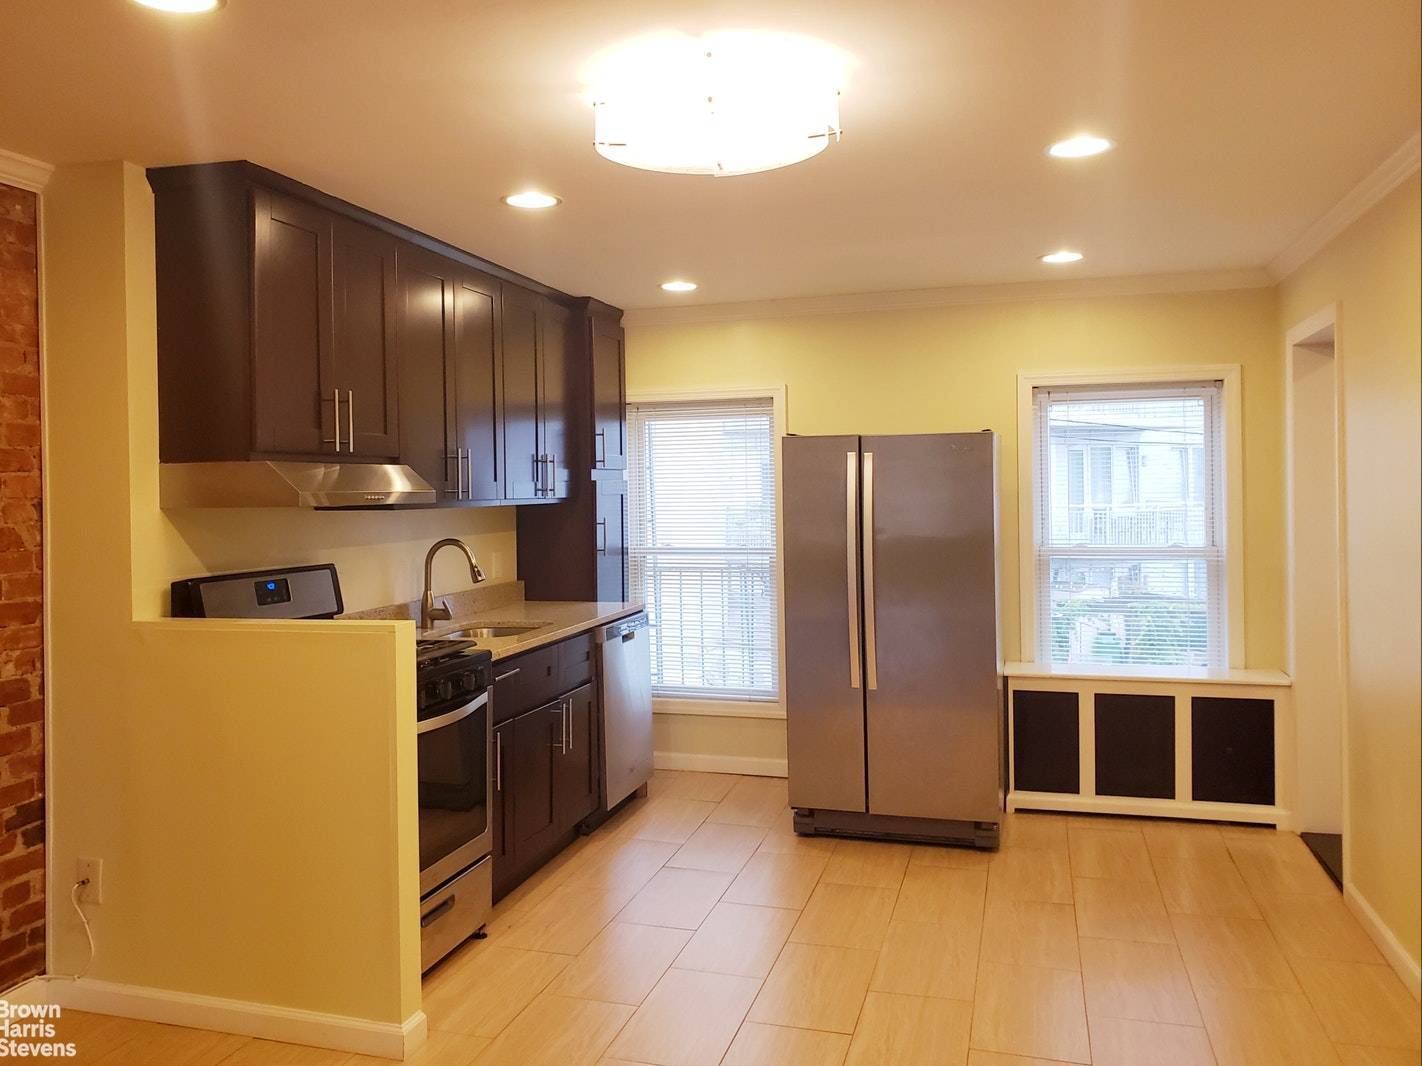 This fully renovated 1BR plus home office offers a spacious, bright, and modern feel combined with the charm of exposed brick and townhouse living in one of the best locations ...